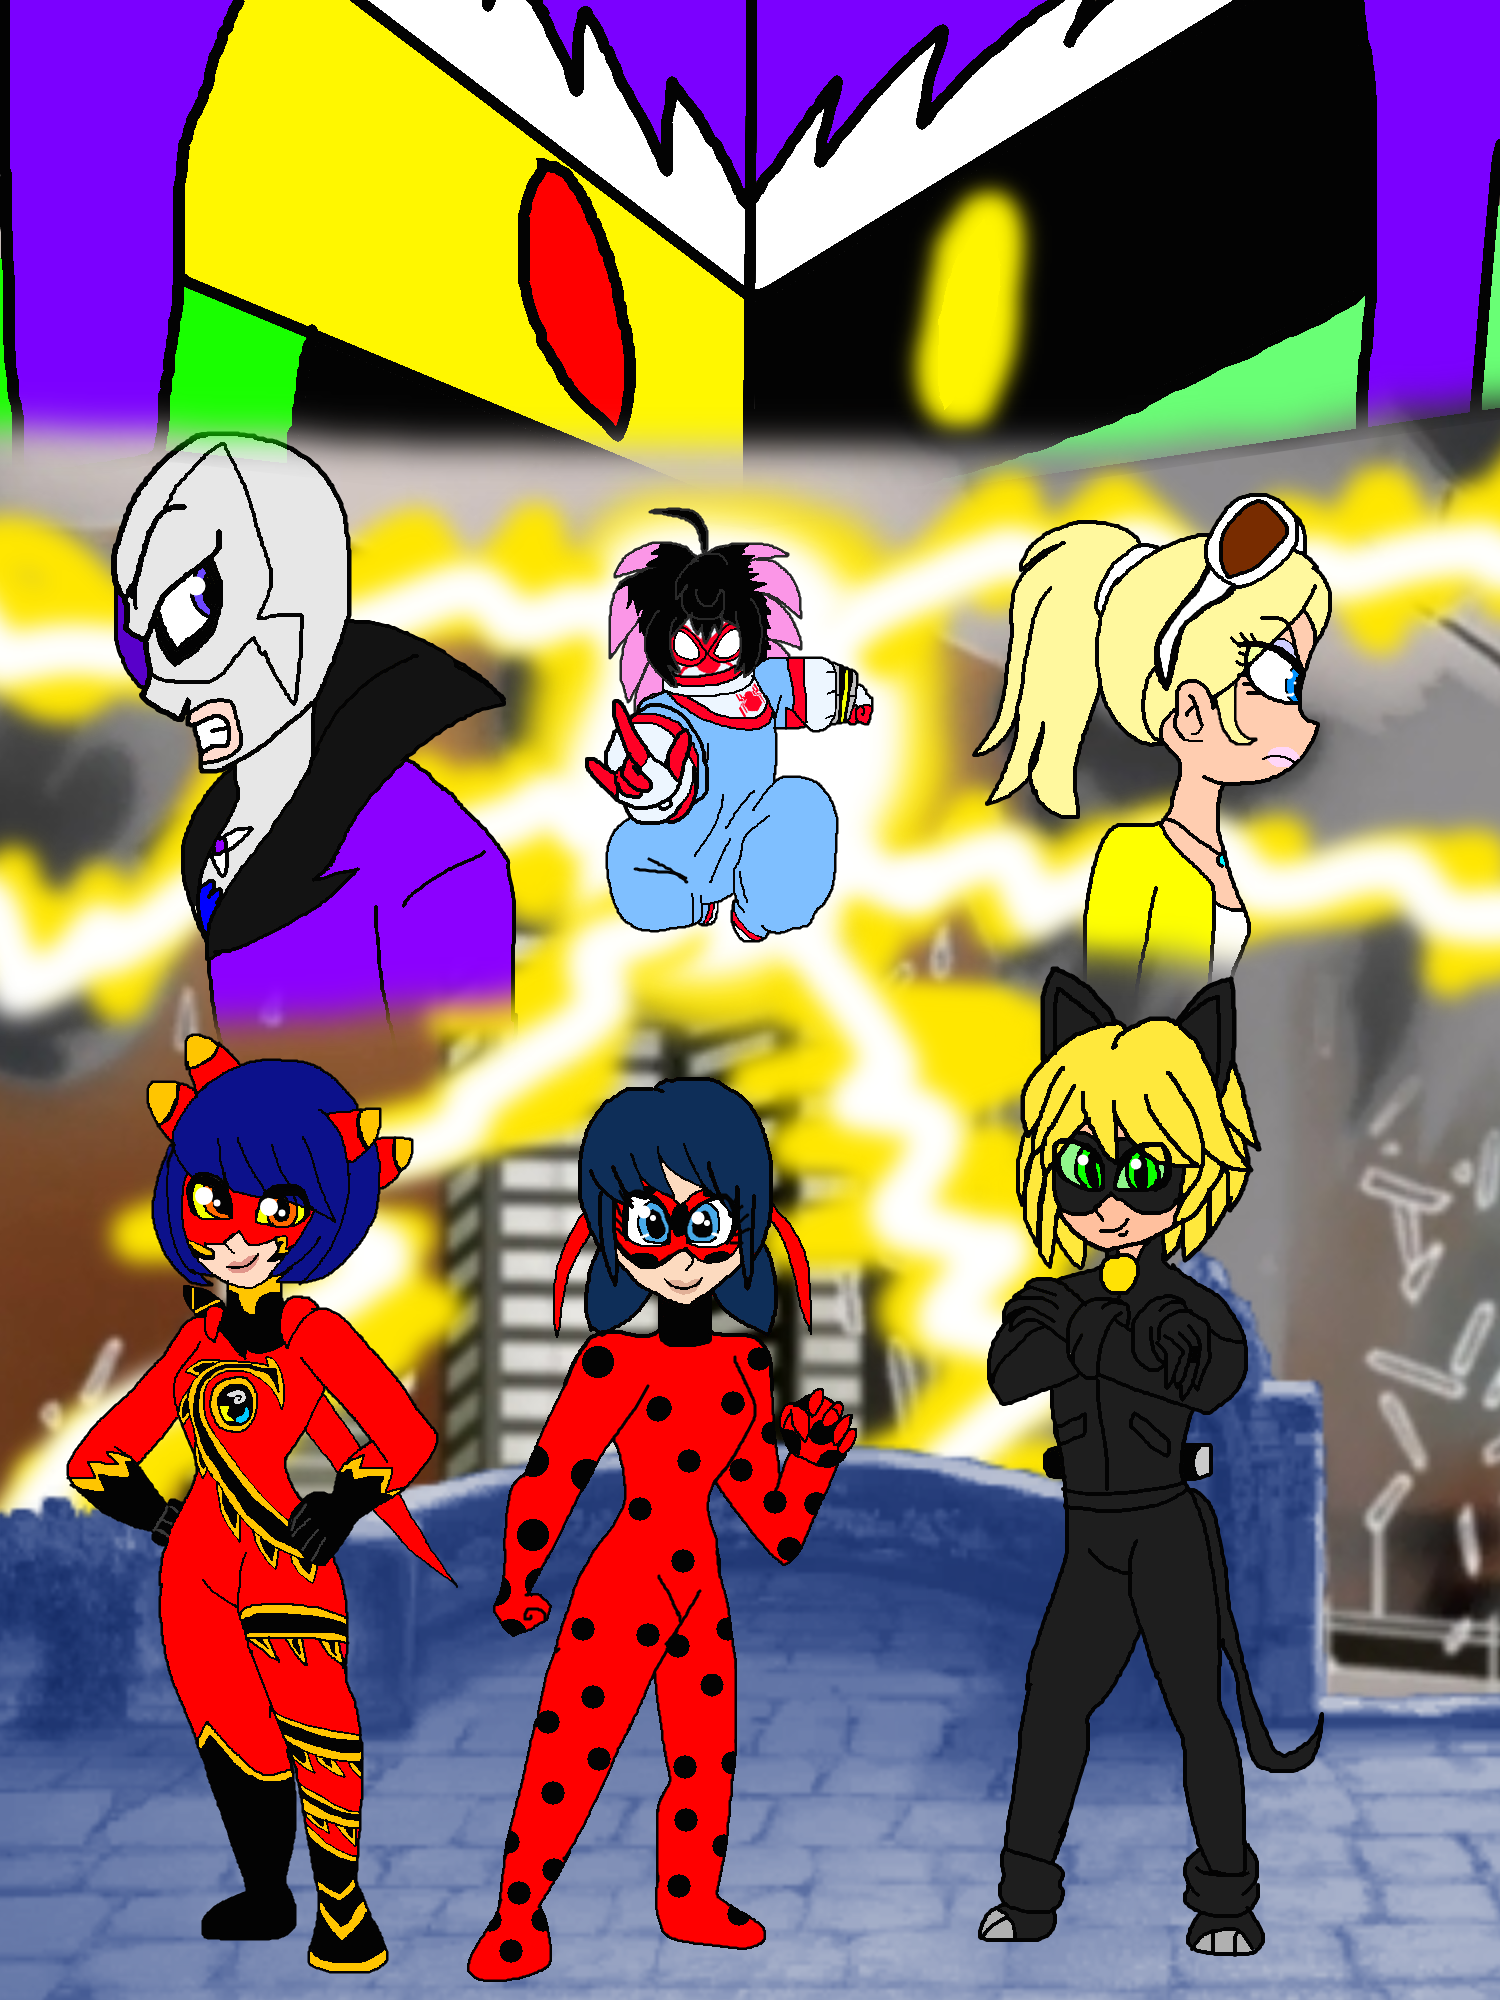 The plans for Miraculous World by alvaxerox on DeviantArt